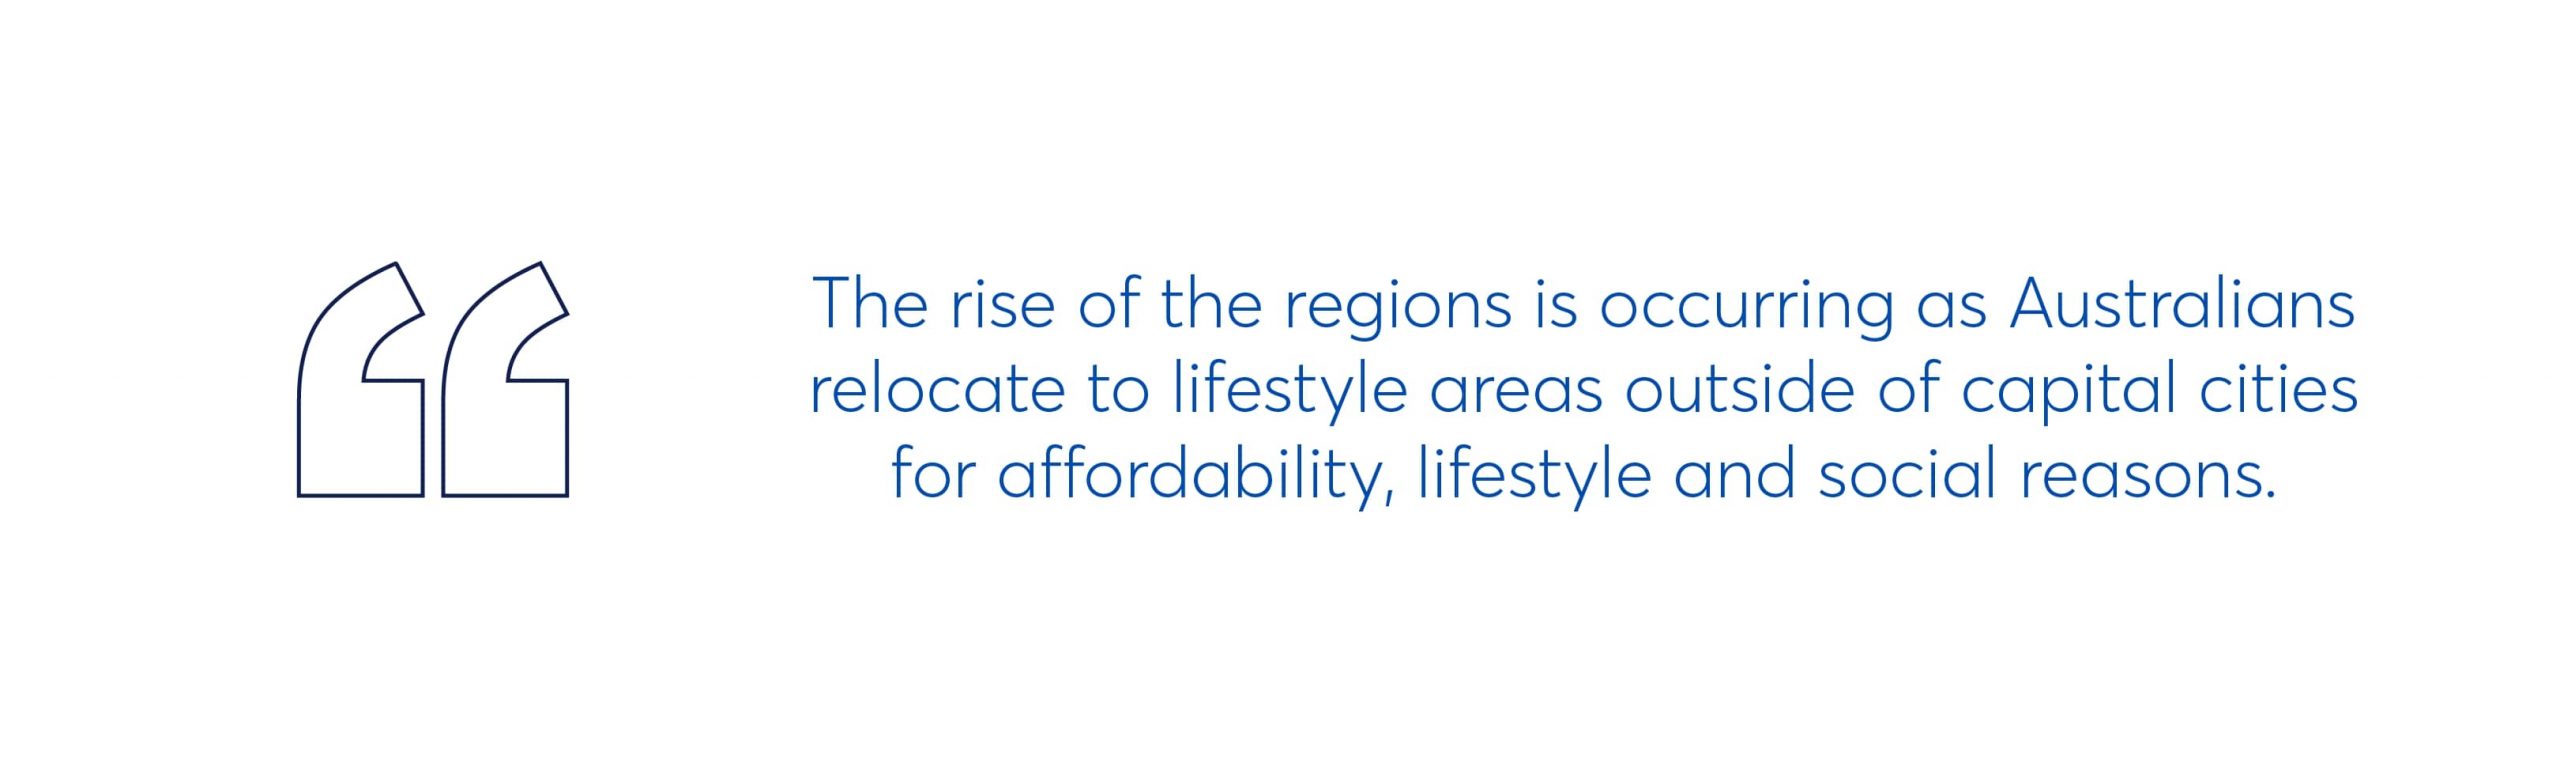 the rise of the regions is occurring as australians relocate to lifestyle areas outside of capital cities for affordability, lifestyle and social reasons